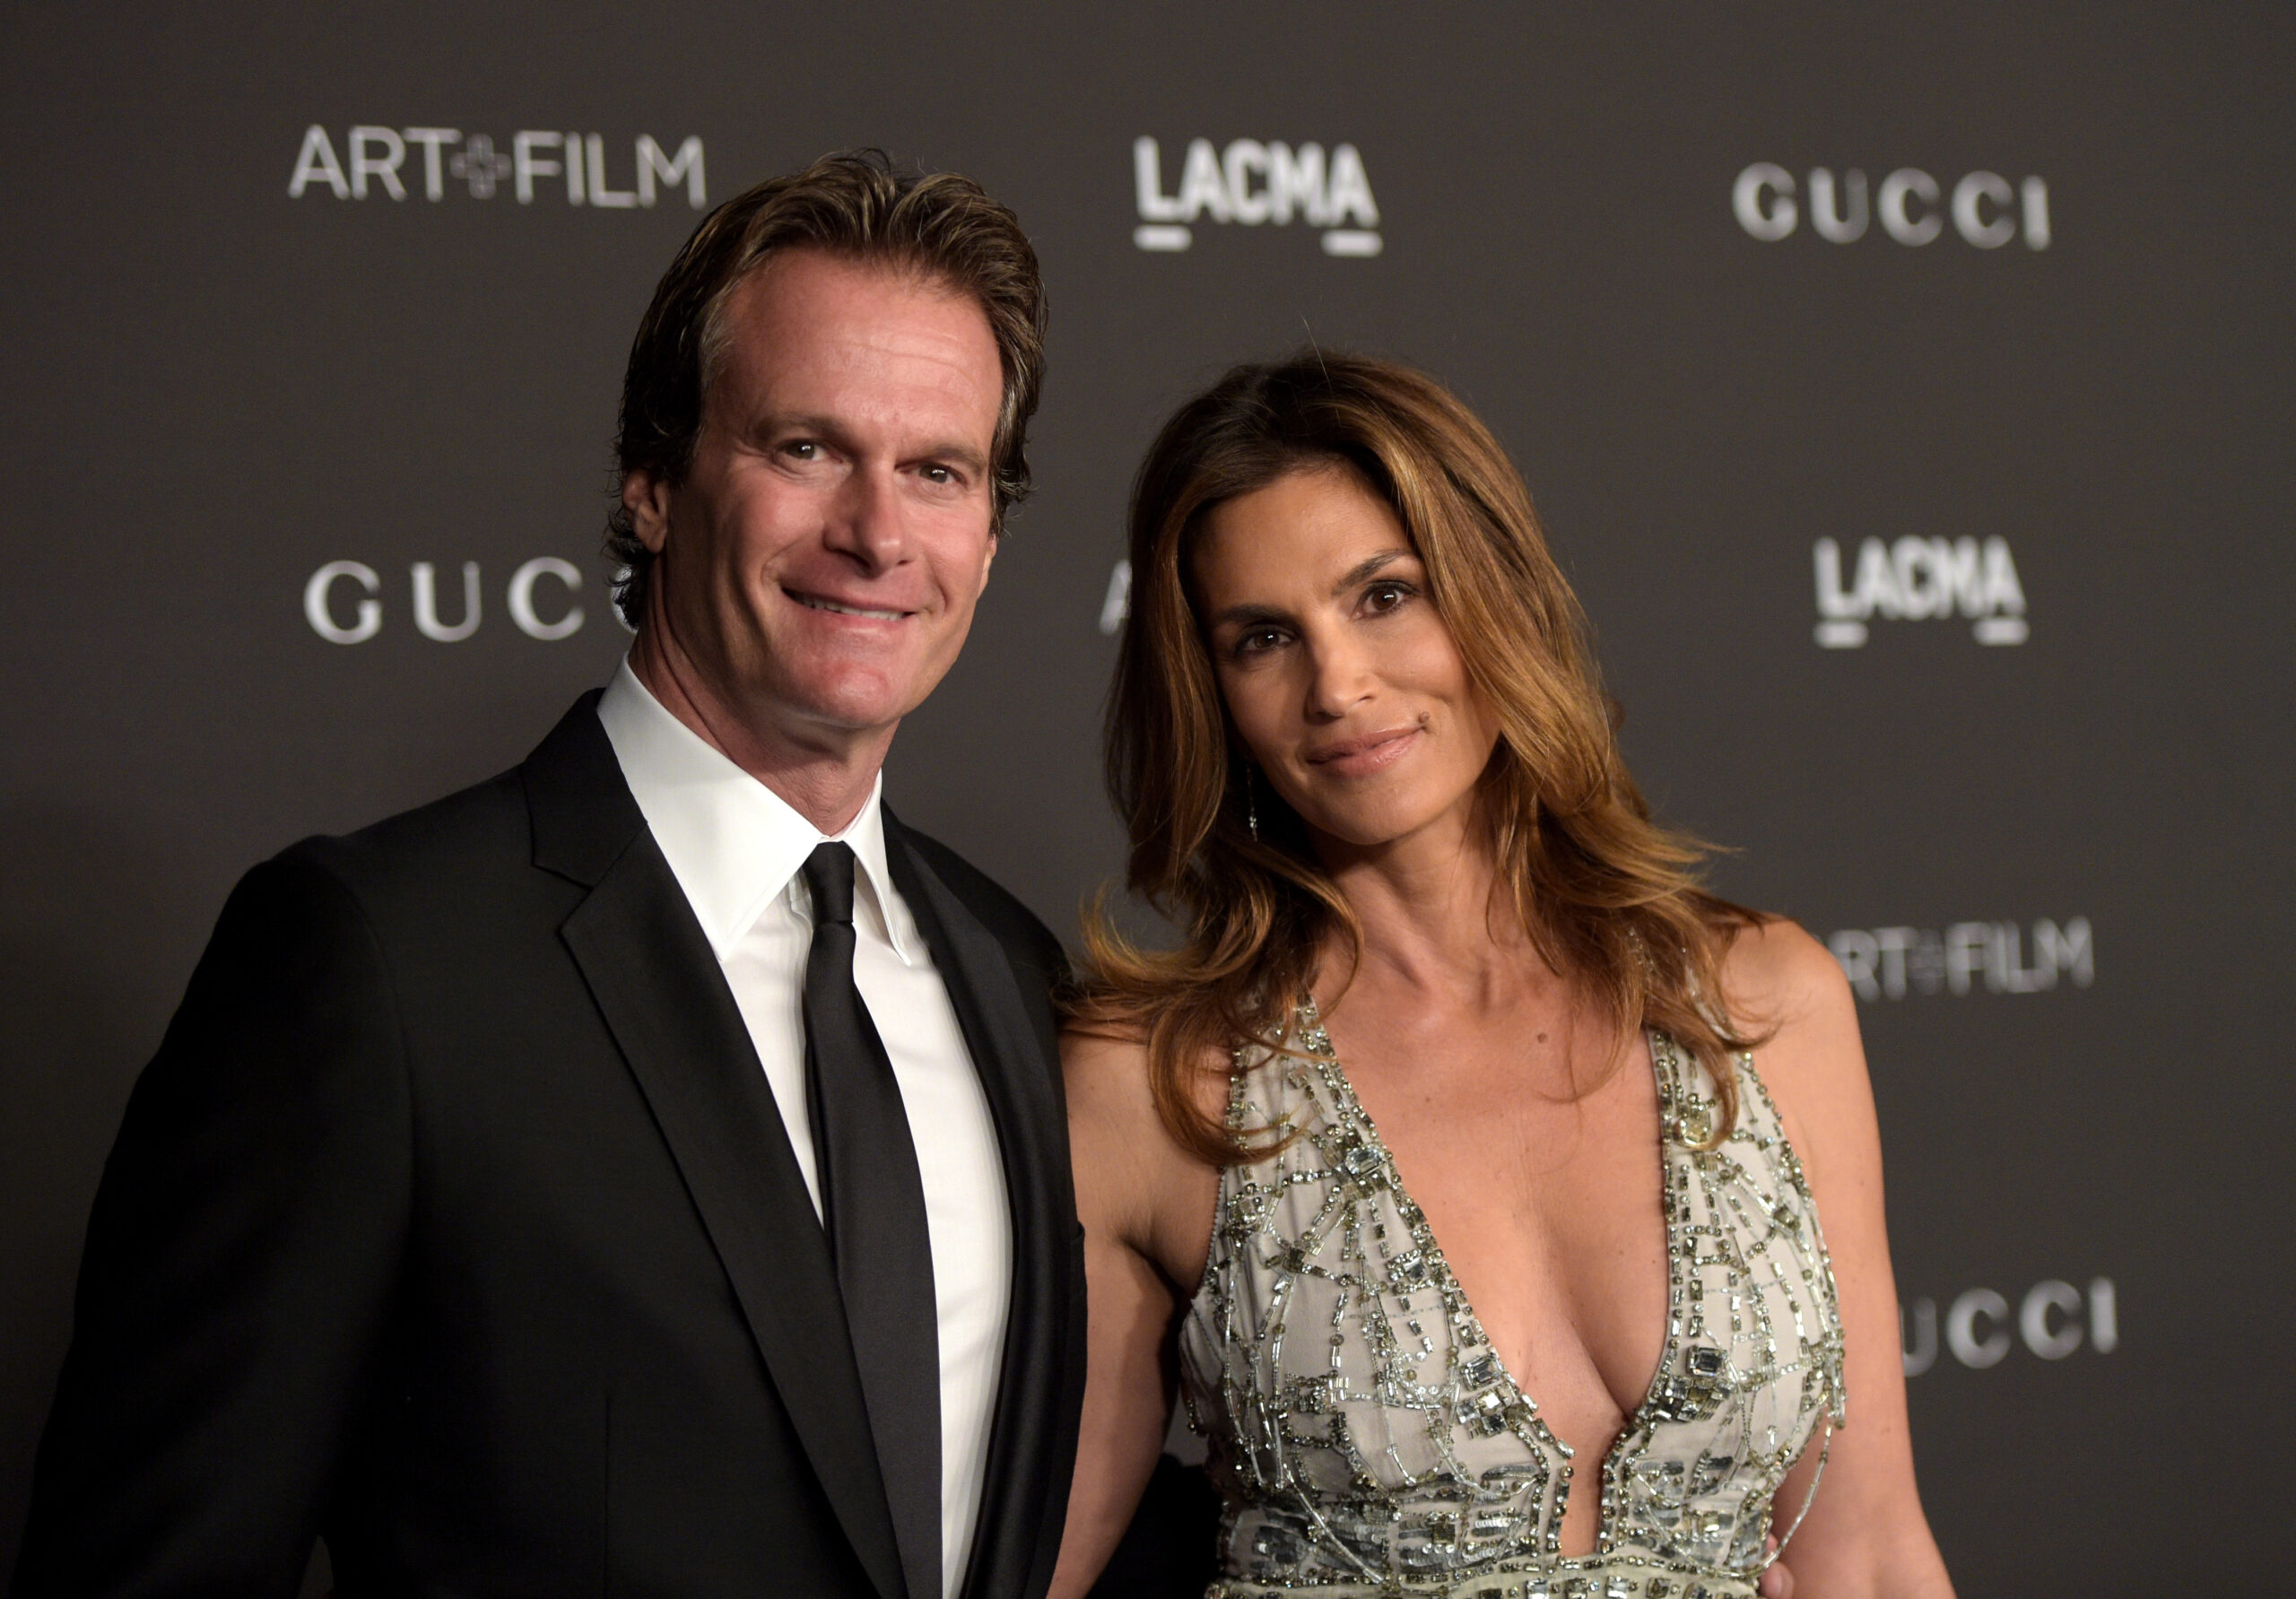 Cindy Crawford Says She and Her Husband Have ‘More Traditional’ Roles In Their Marriage